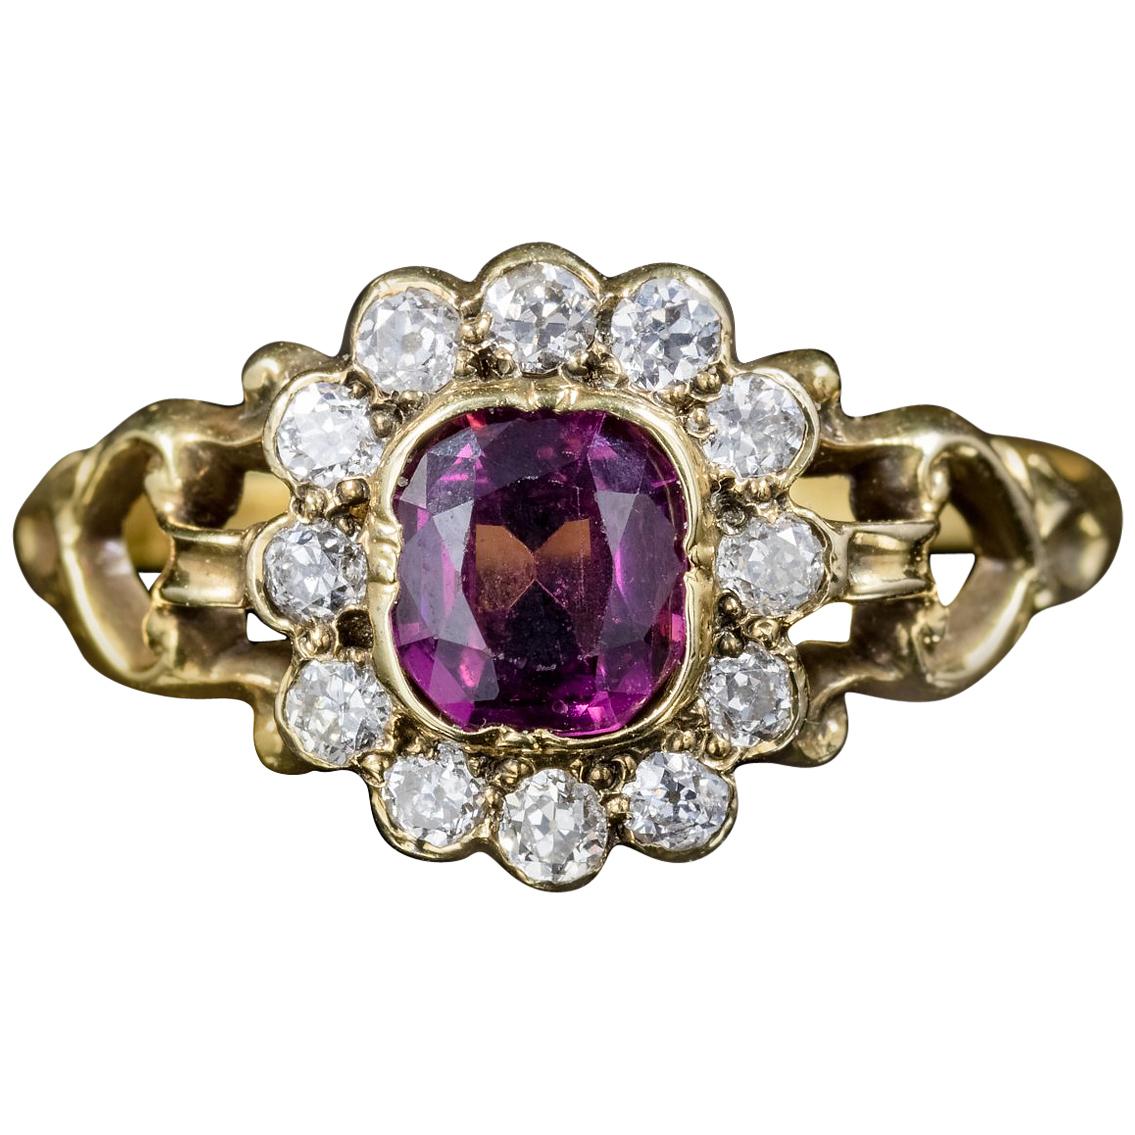 Antique French Victorian Amethyst Diamond Cluster Ring 18 Carat Gold, circa 1860